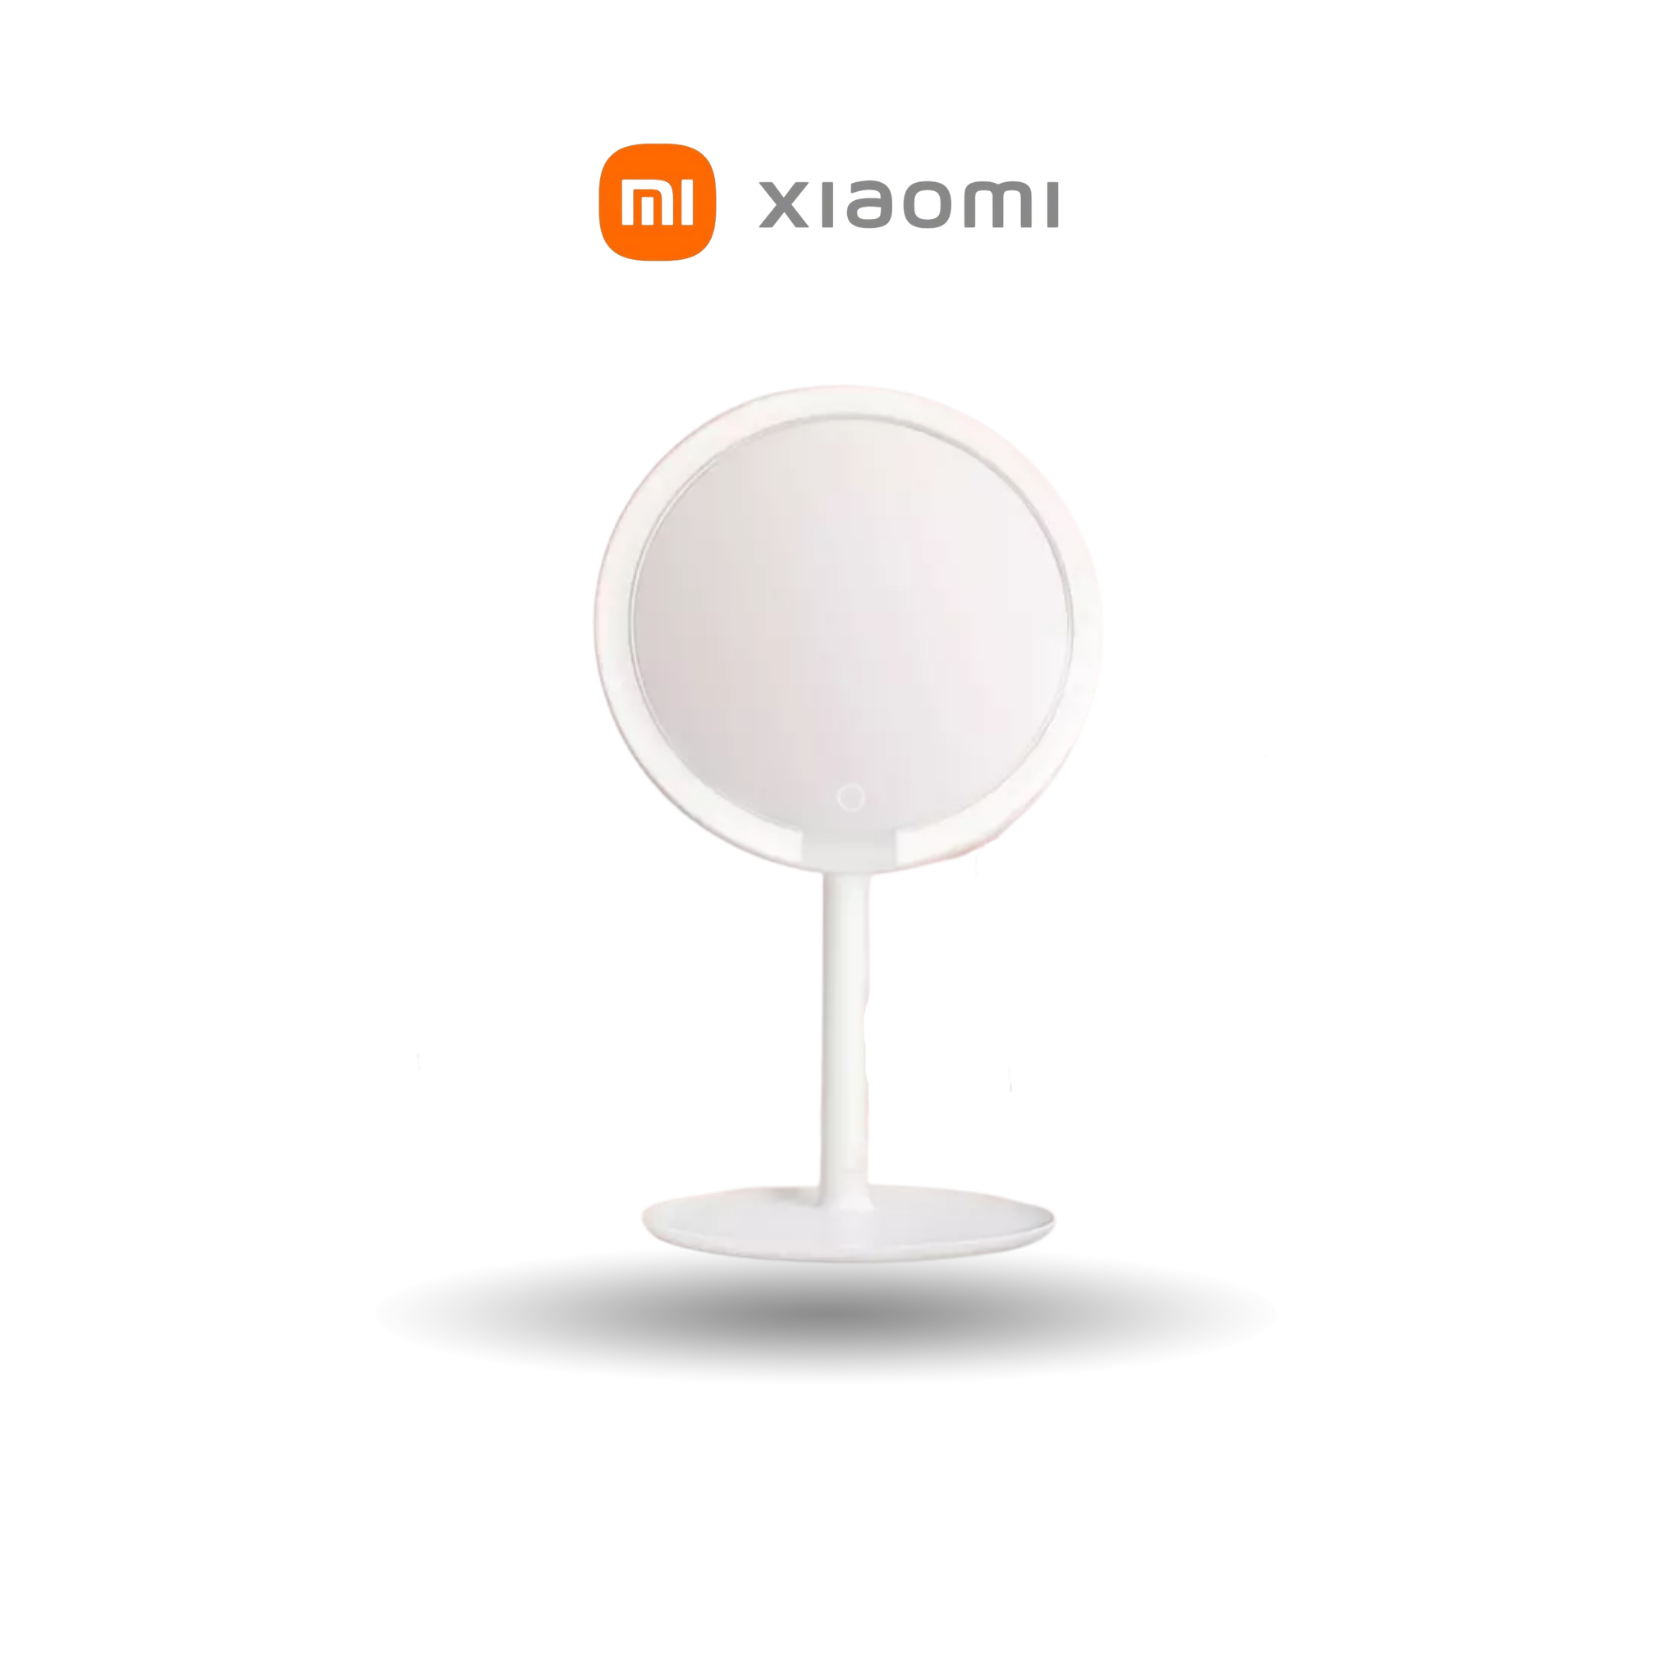 Xiaomi Mijia LED Lighted Makeup Mirror - Three Adjustable Brightness 0 - 45 Adjustable Angle Rechargeable Charging